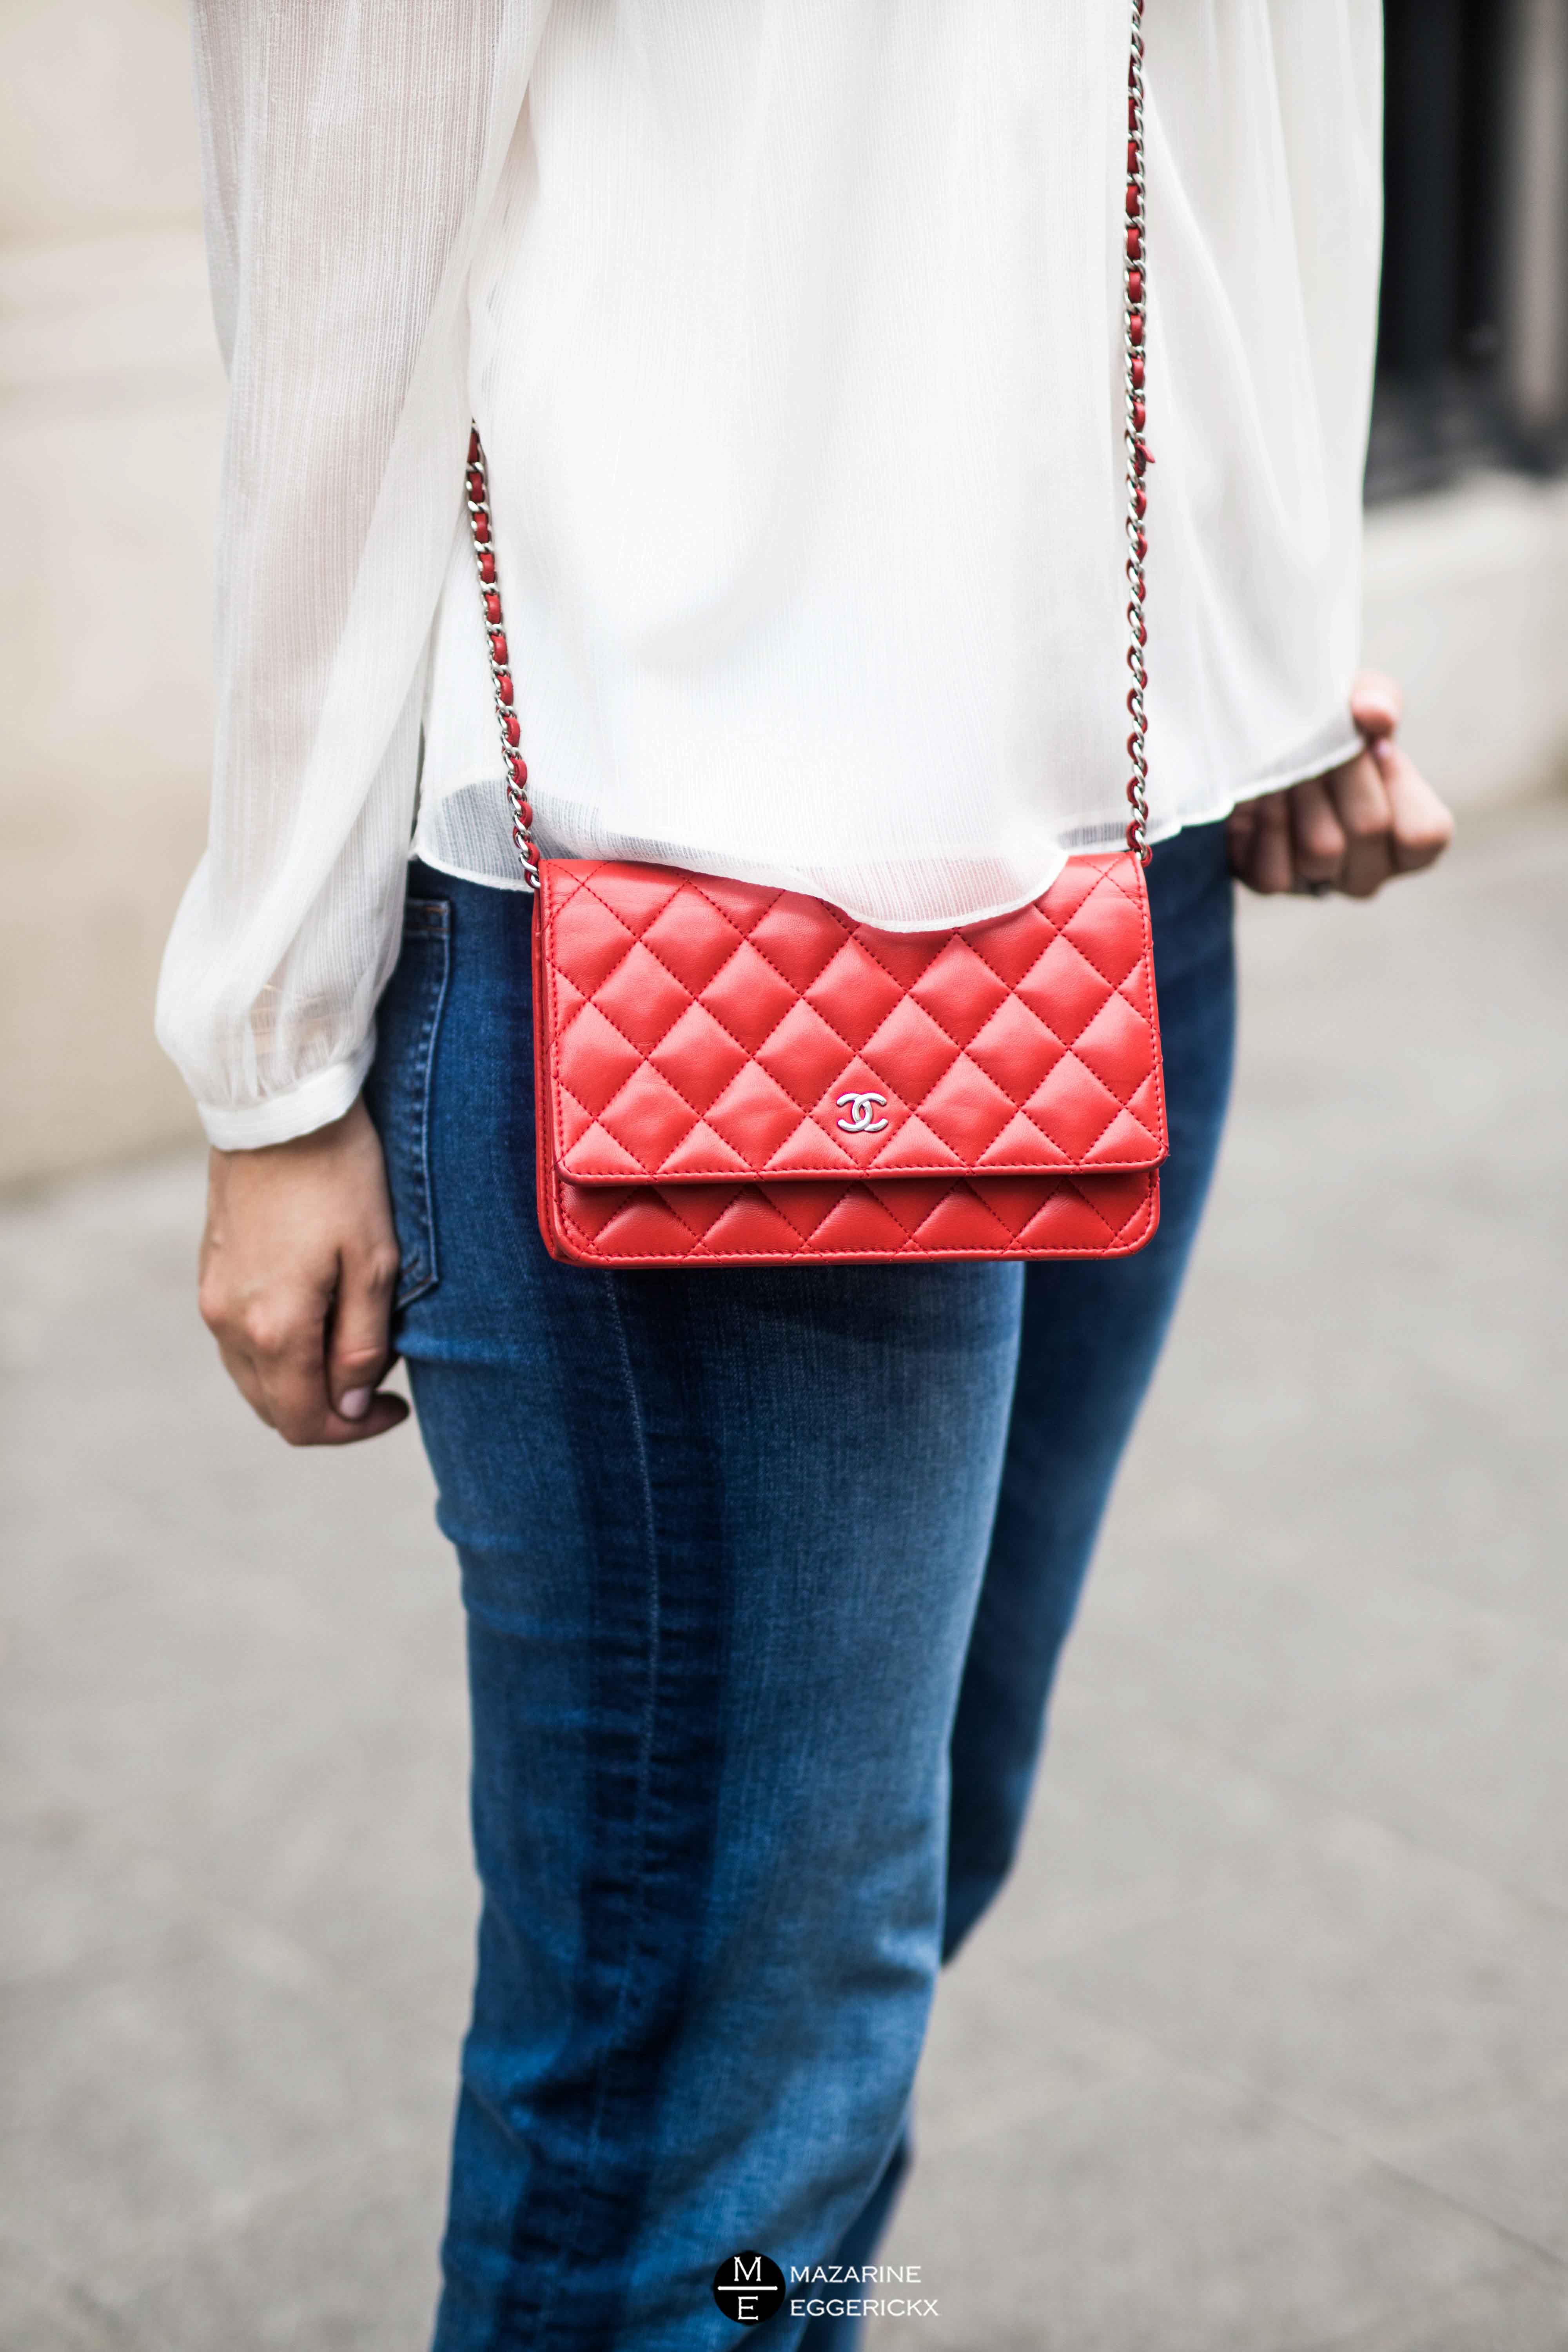 A pop of red - Axelle Blanpain